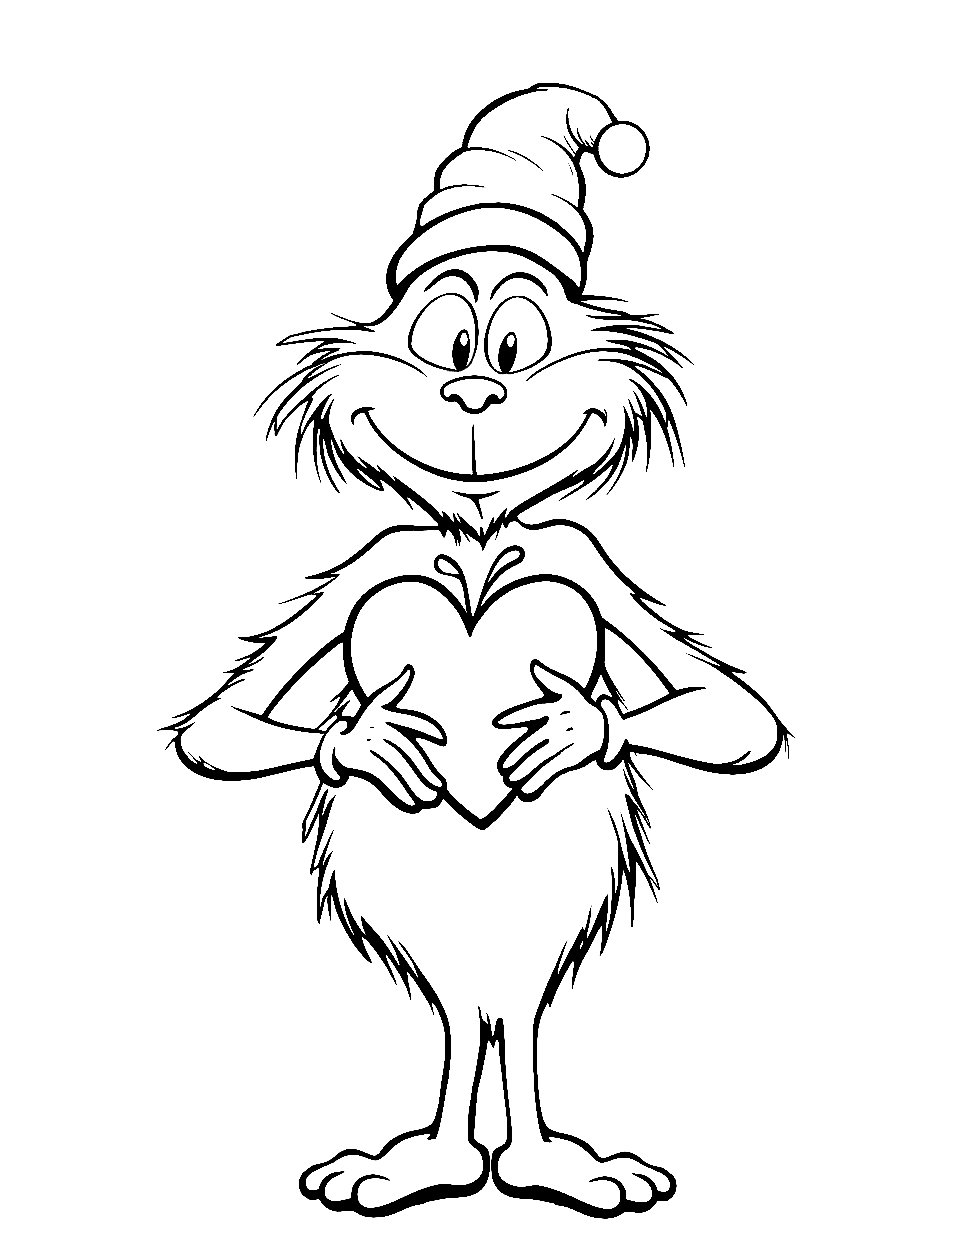 Grinch’s Big Heart Coloring Page - The Grinch is holding a heart-shaped gift with a joyous expression.